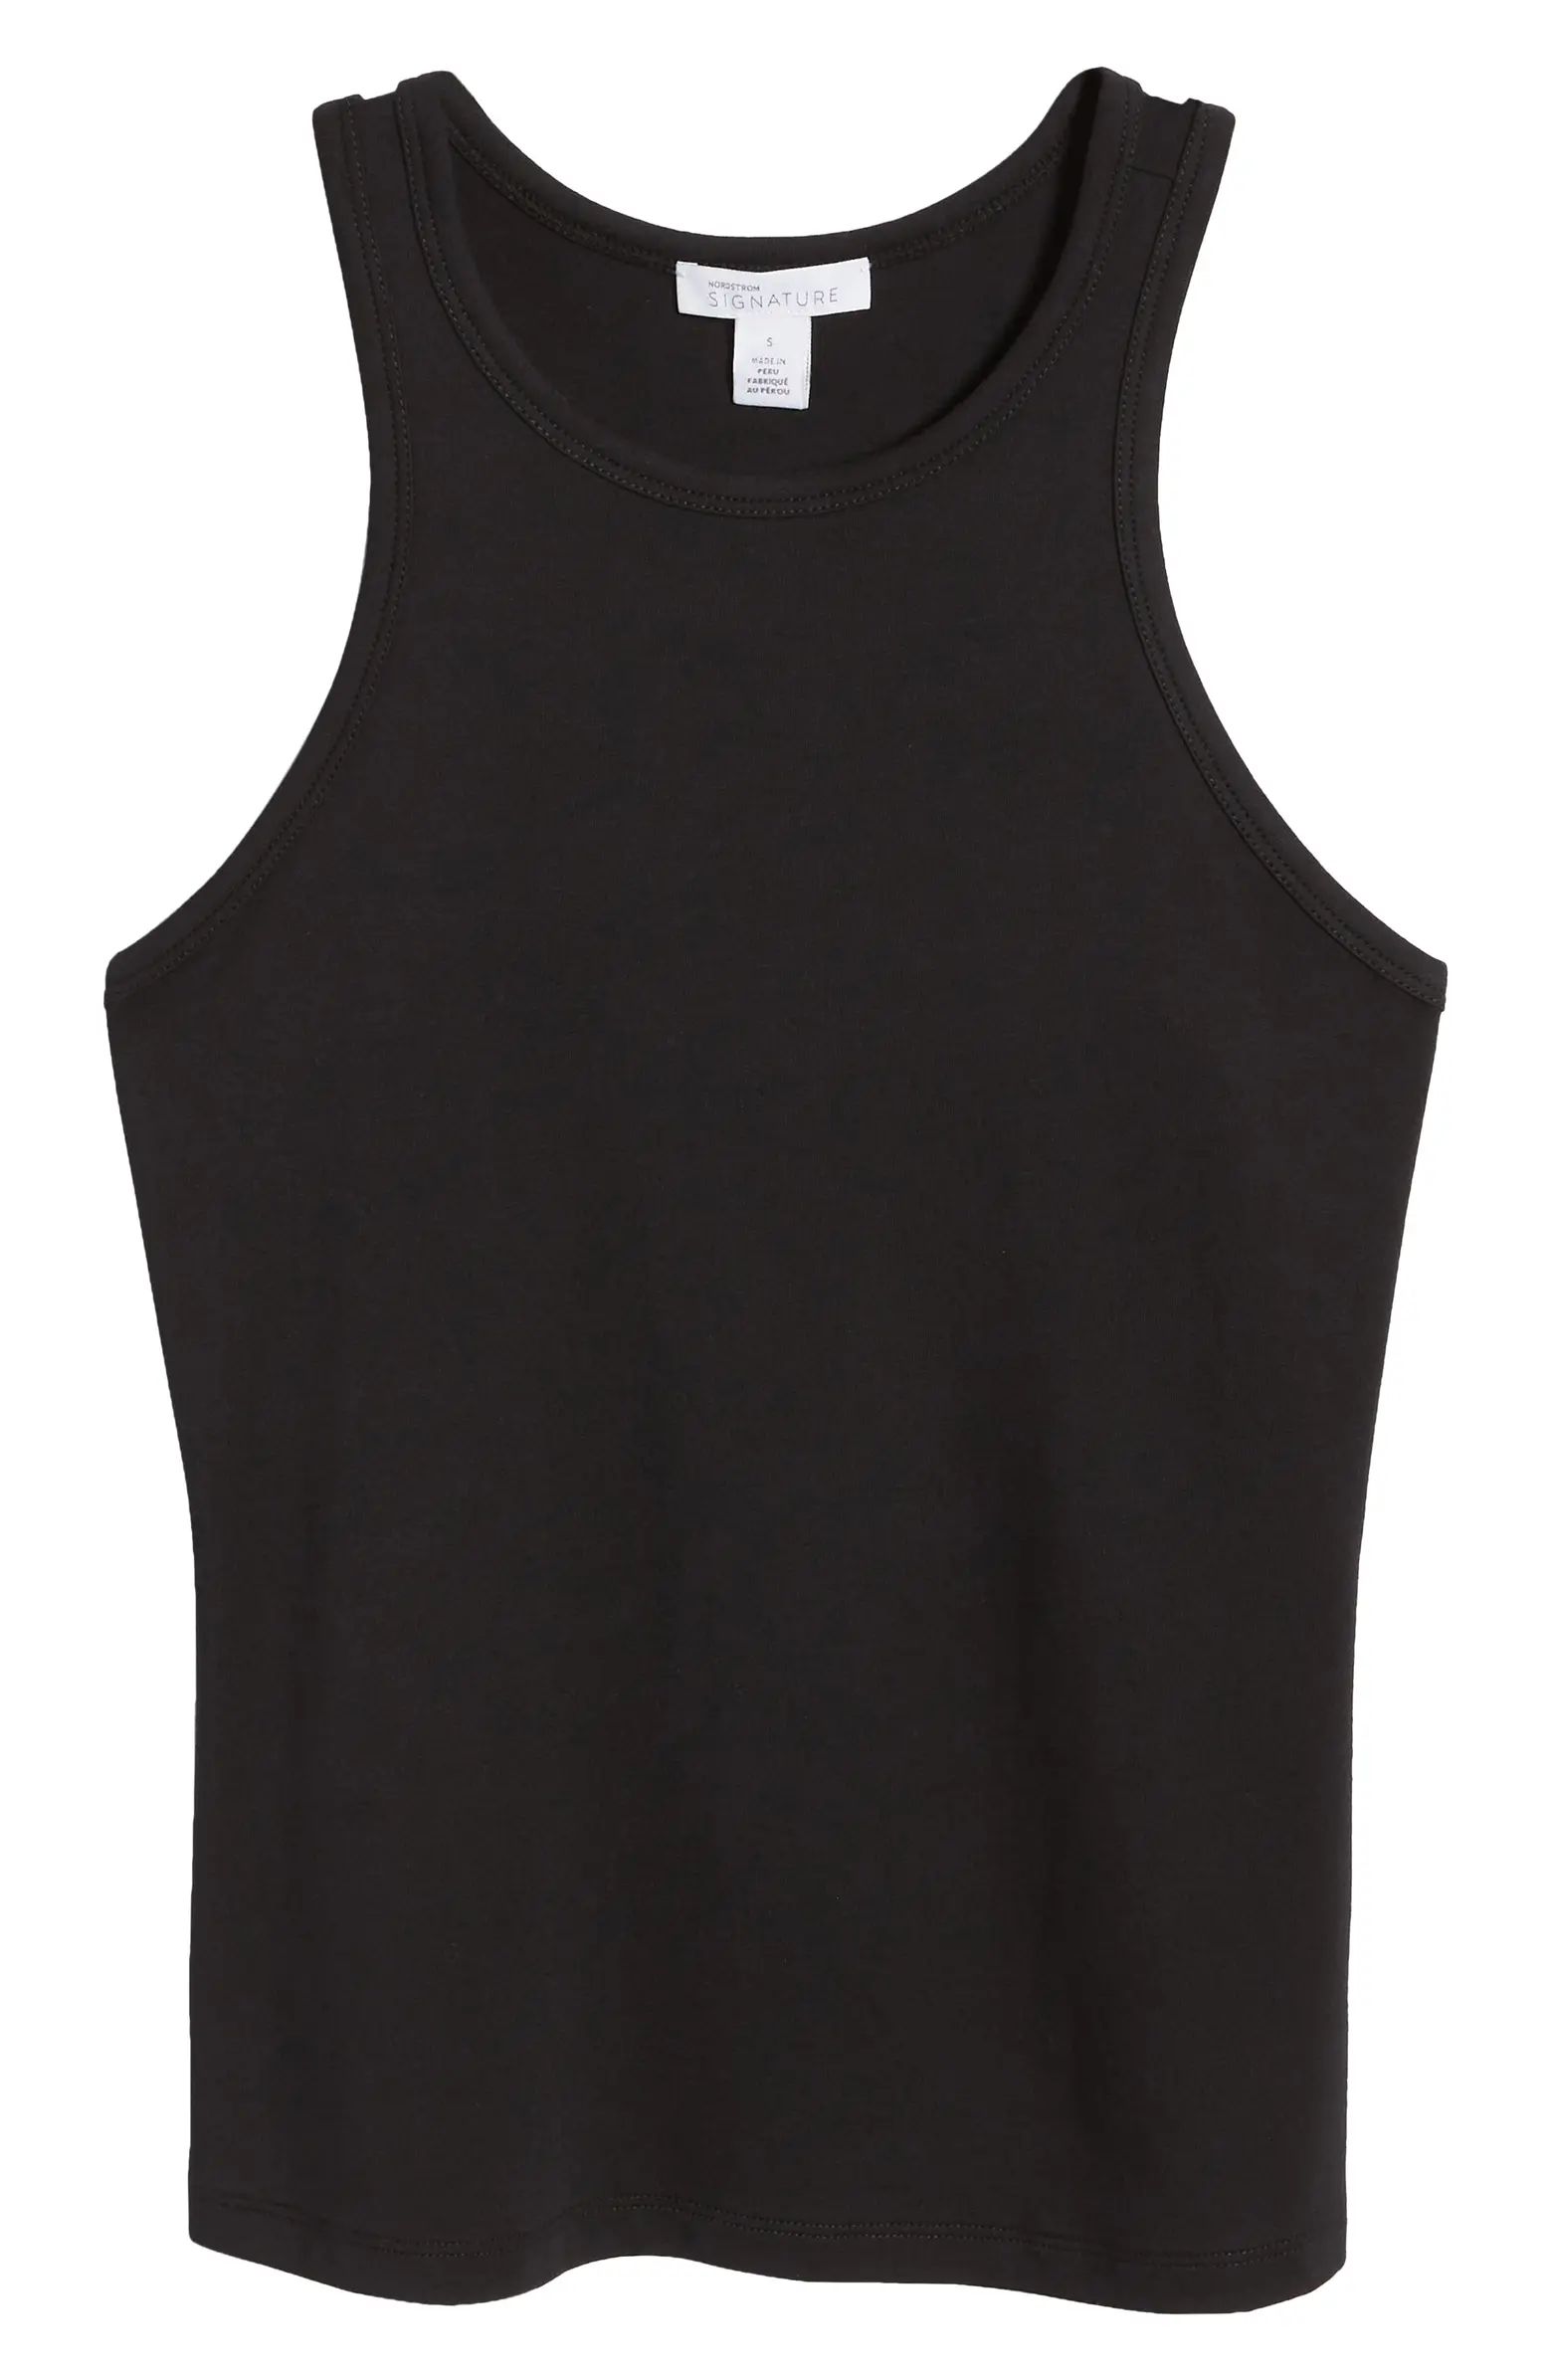 Nordstrom Signature Fitted Layering Tank | Nordstrom | Nordstrom